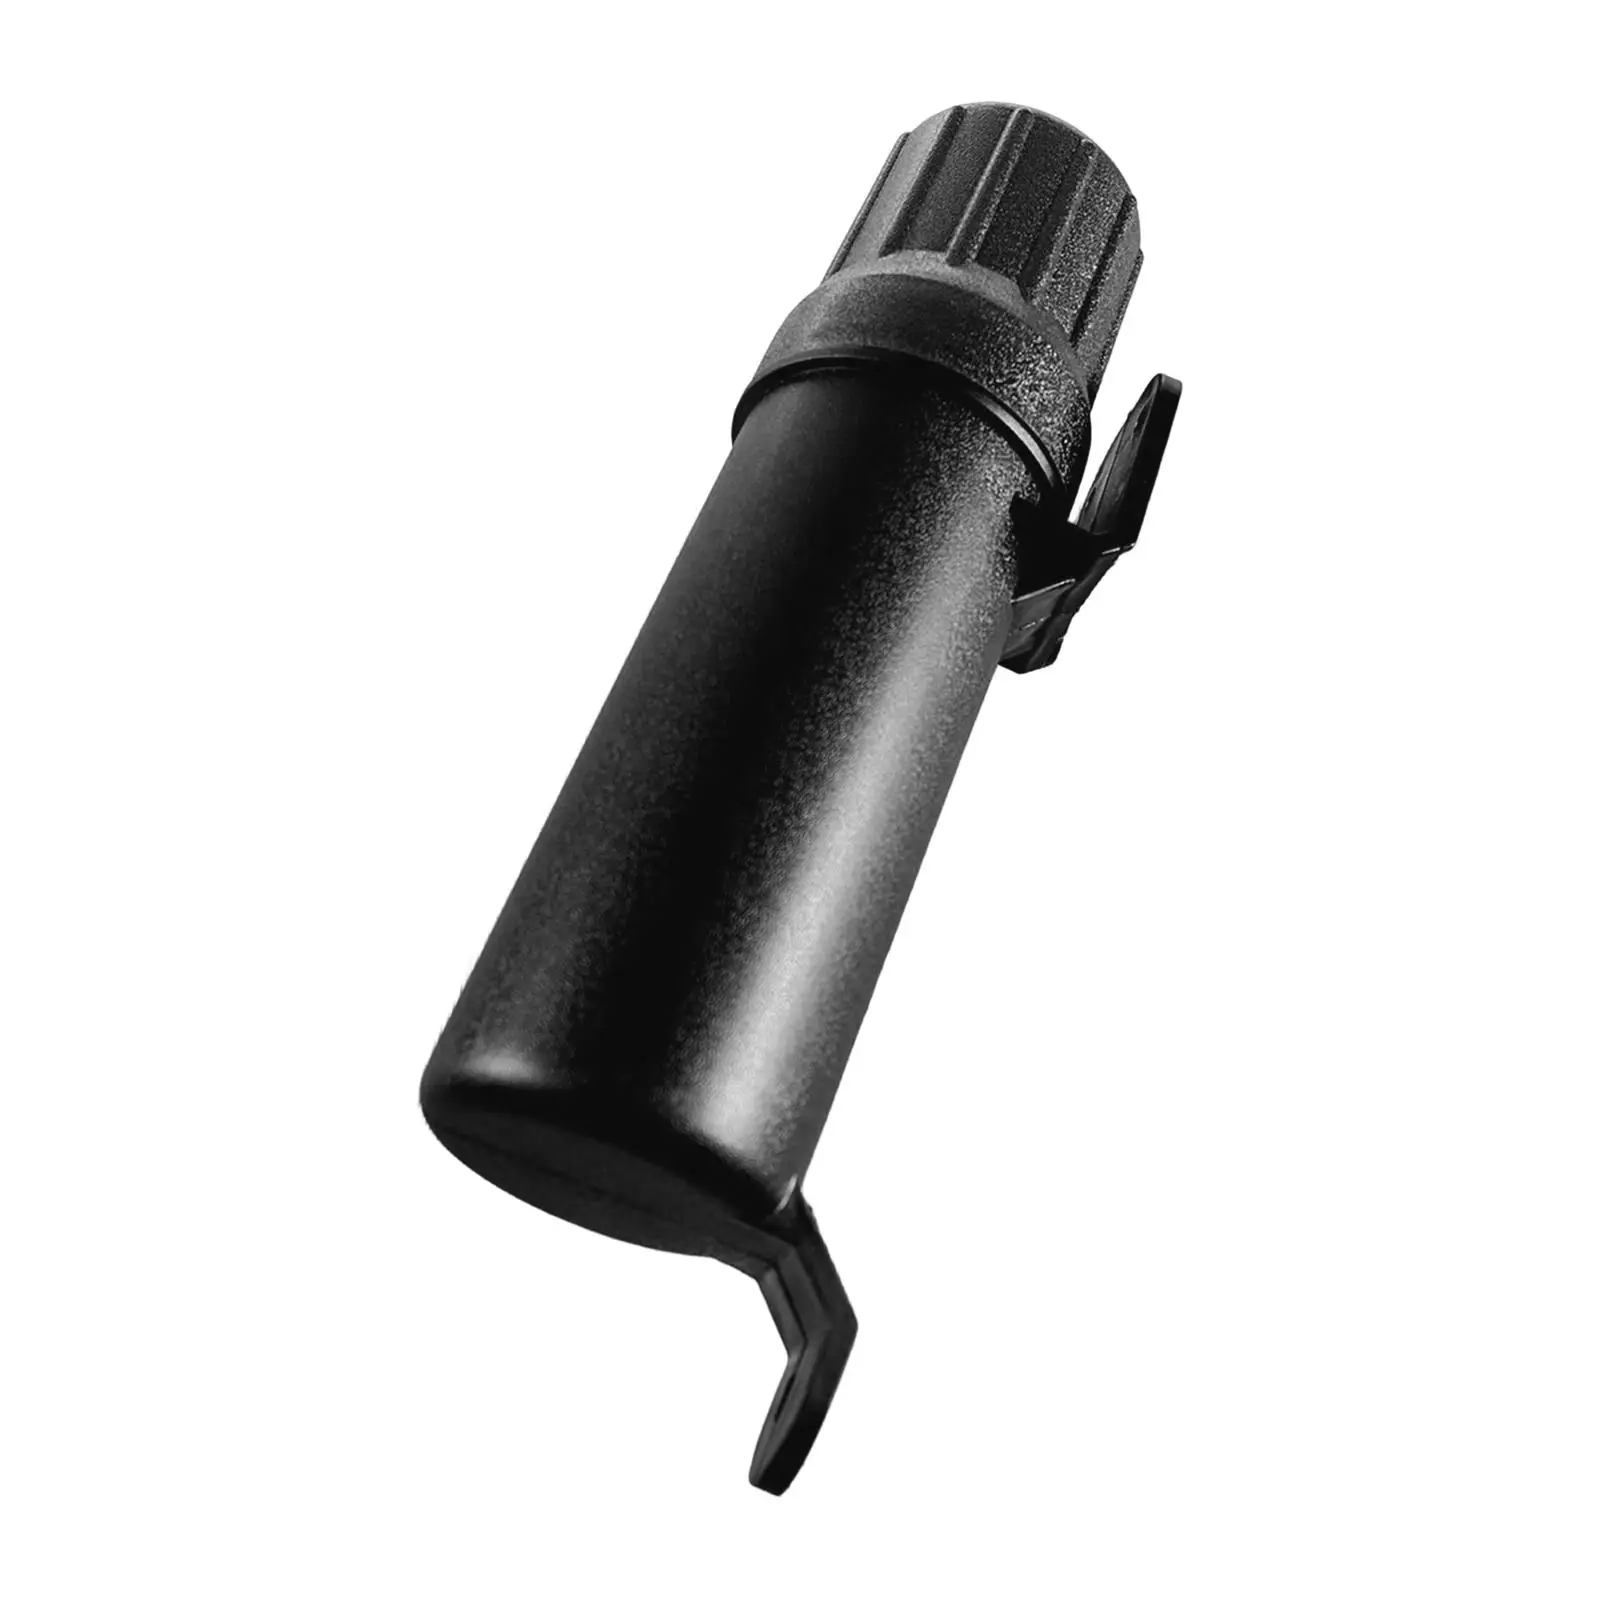 Motorcycle Tool Tube Waterproof Accessories Durable Direct Replaces Durable